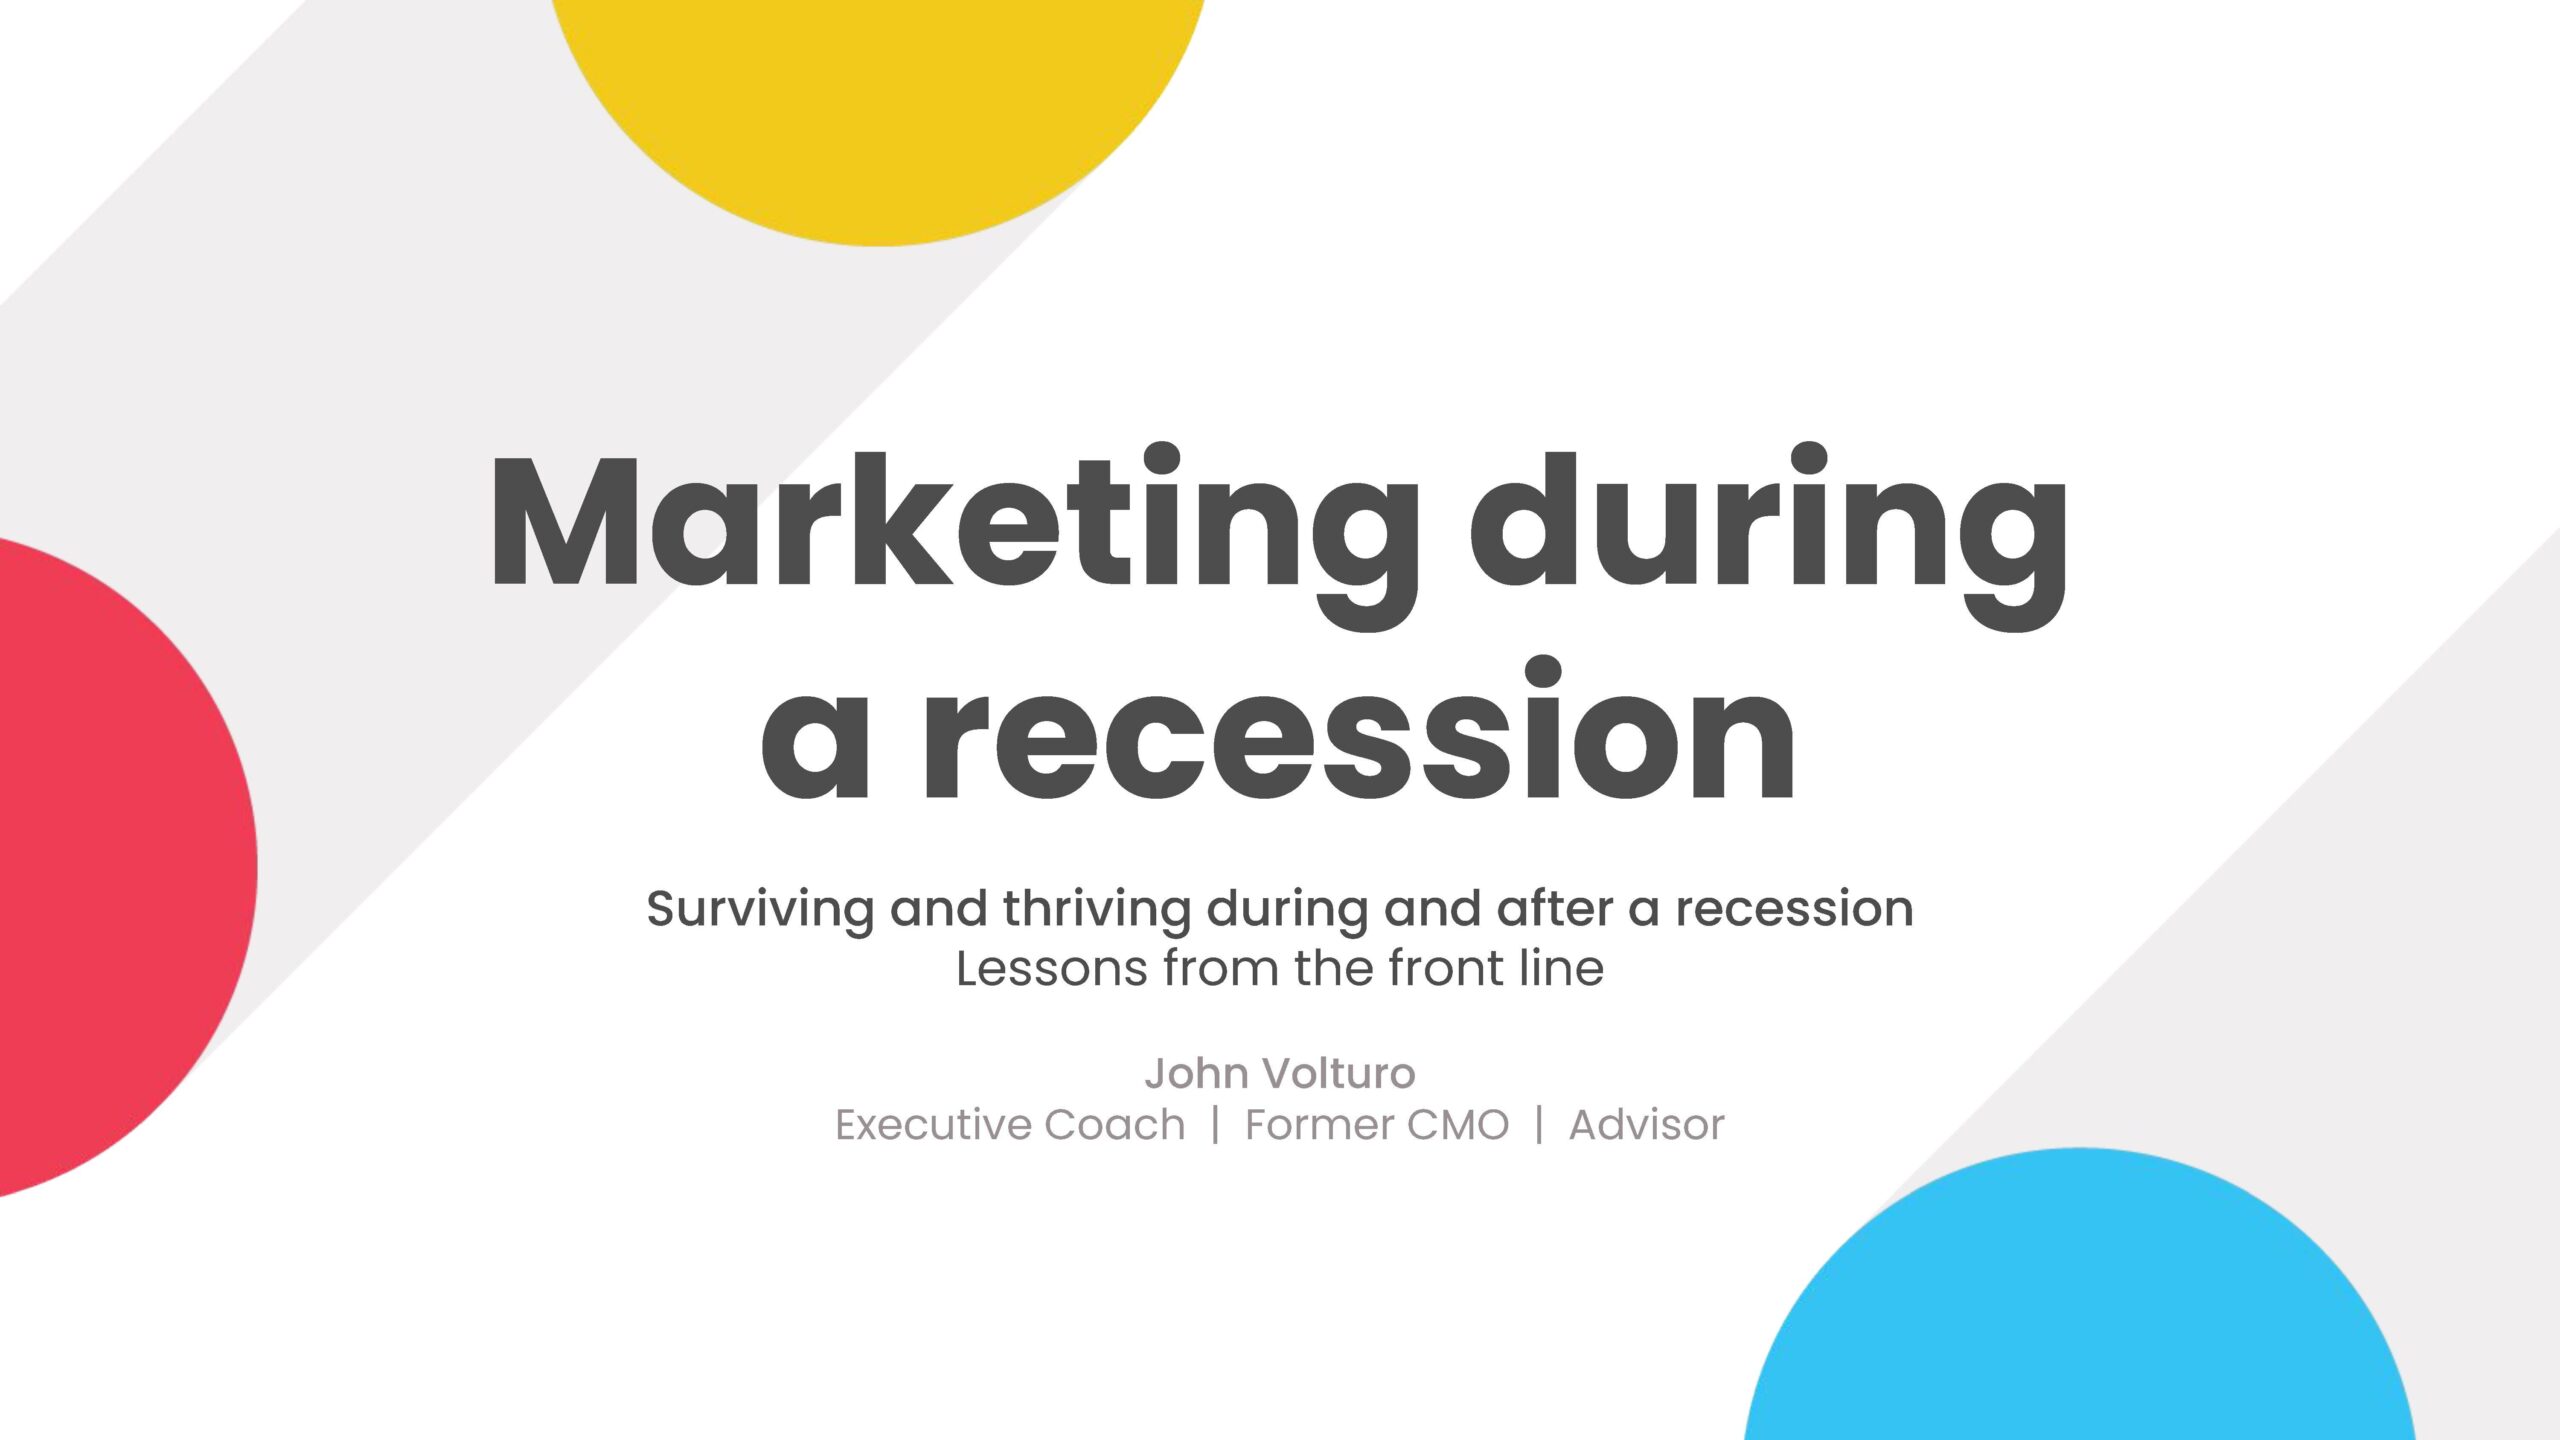 Marketing Lessons from a Recession